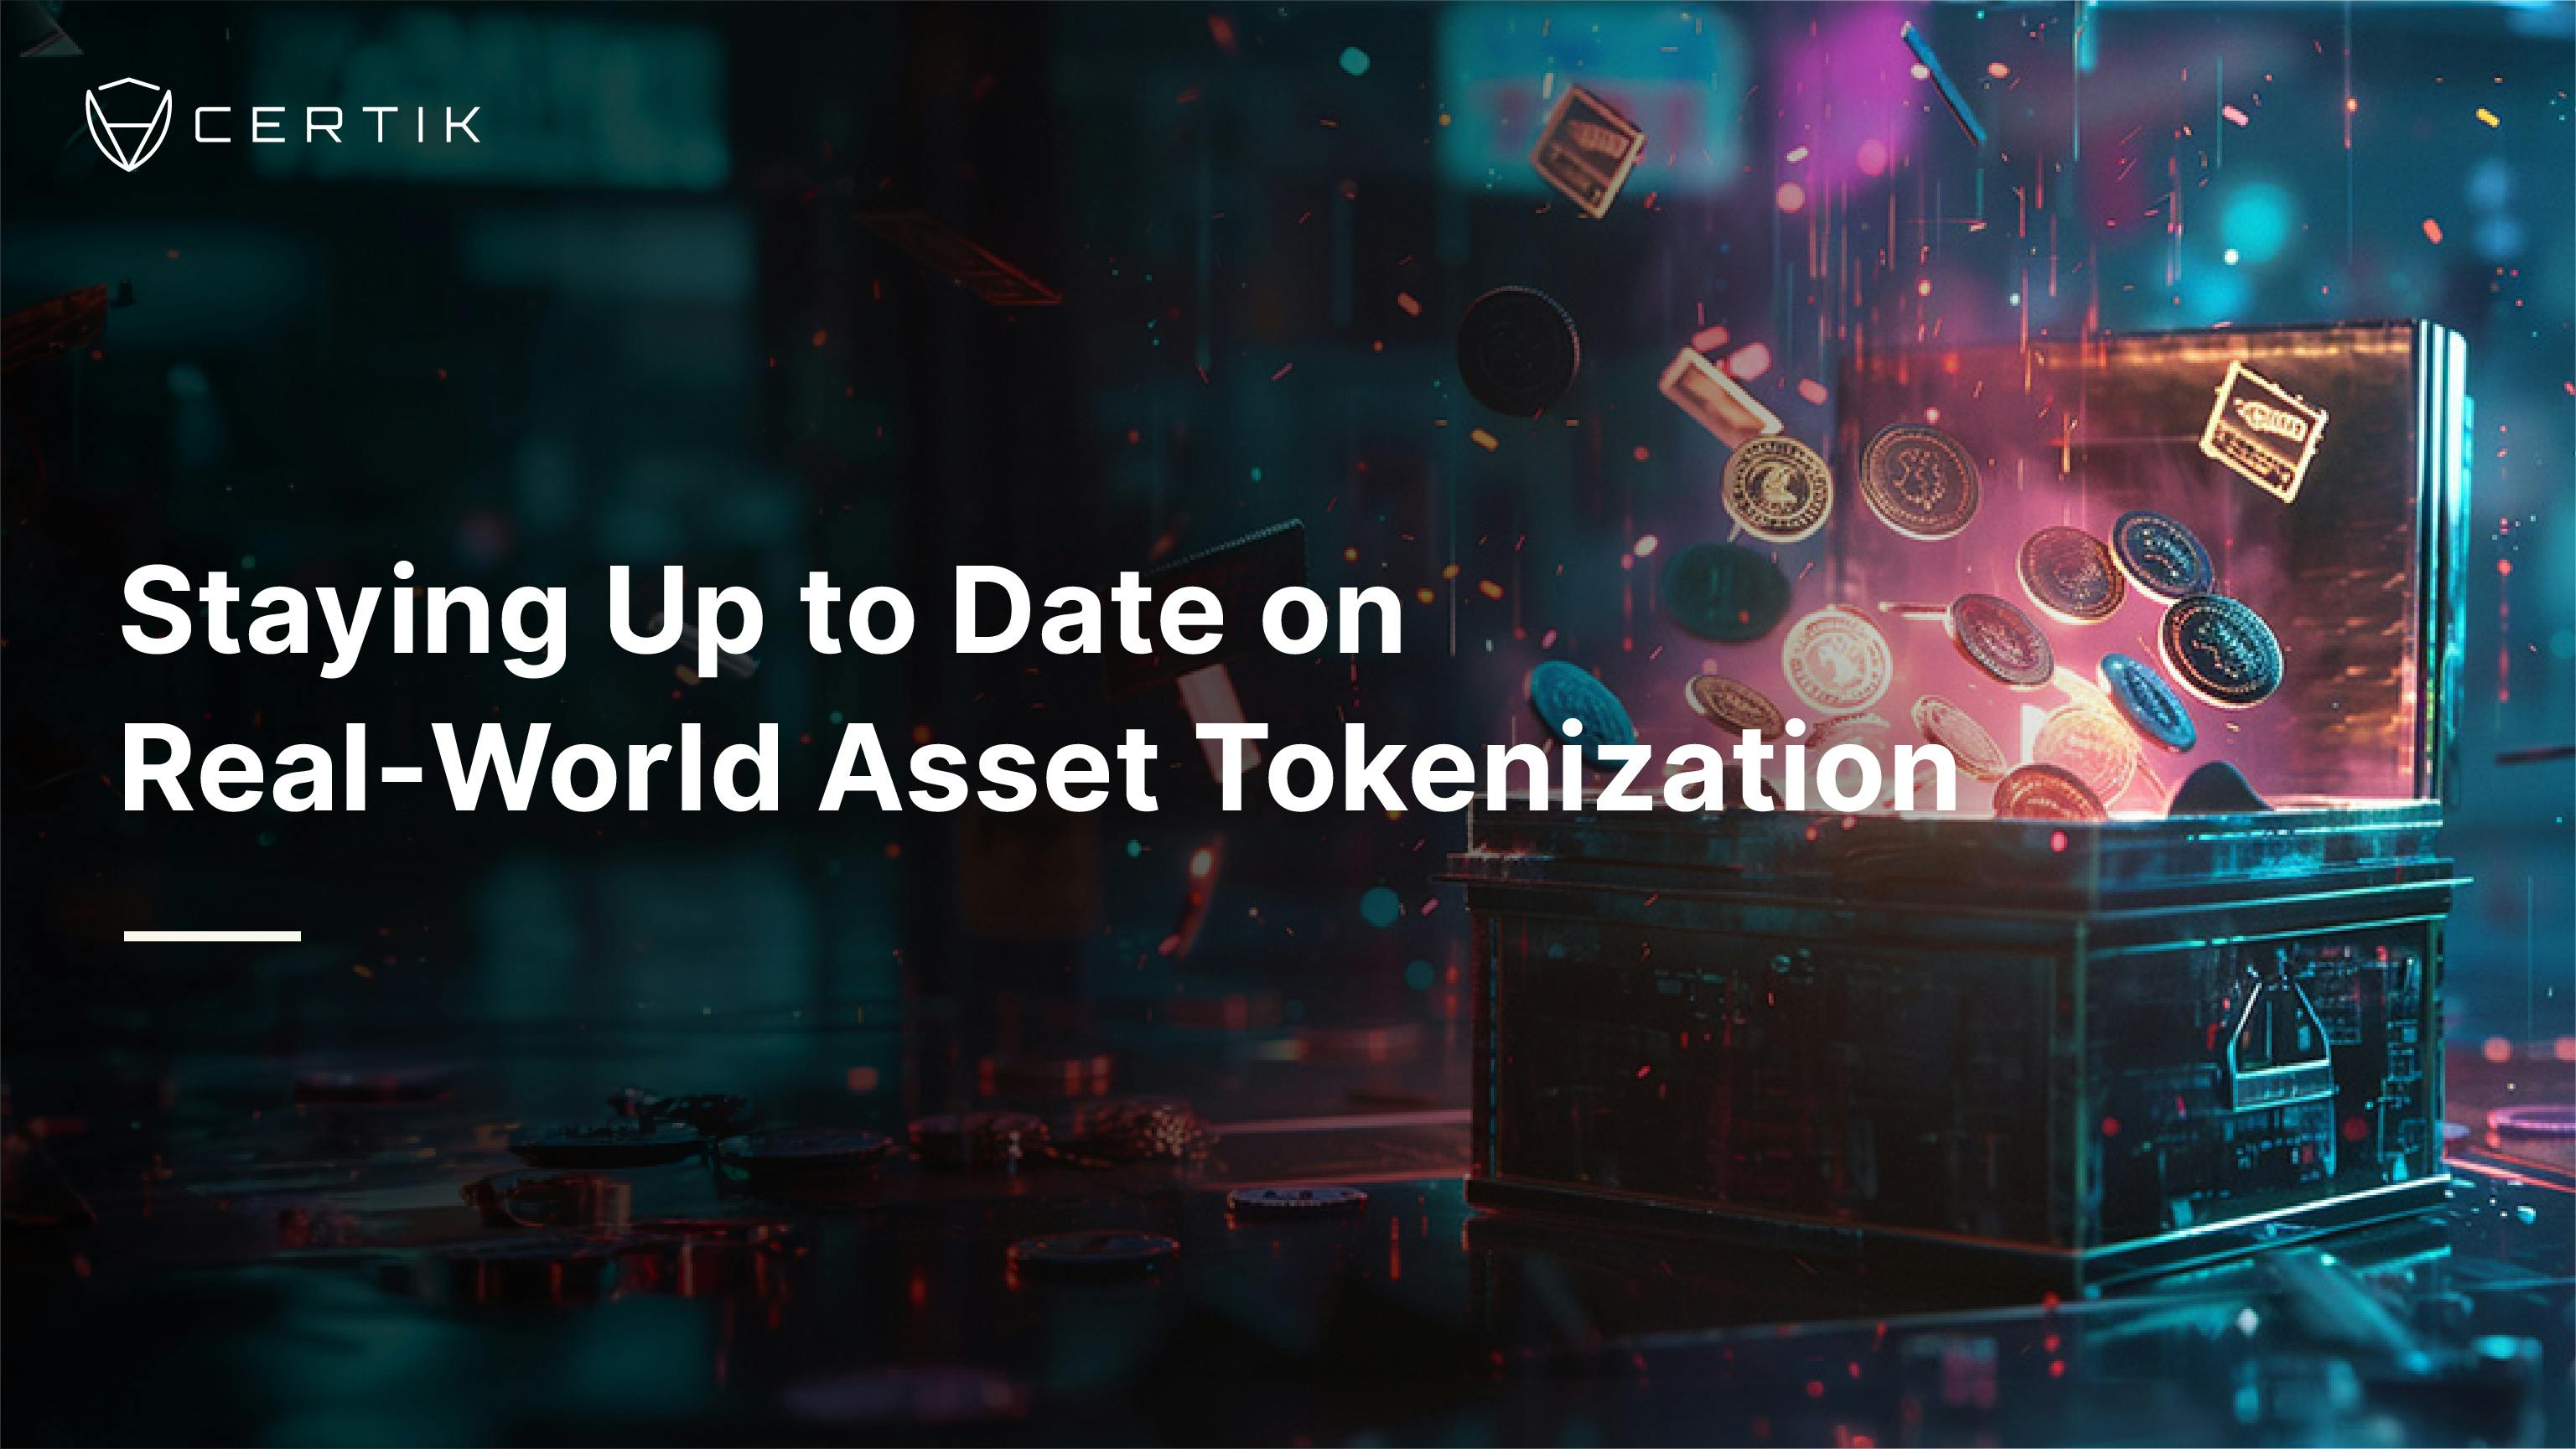 Staying Up to Date on Real-World Asset Tokenization